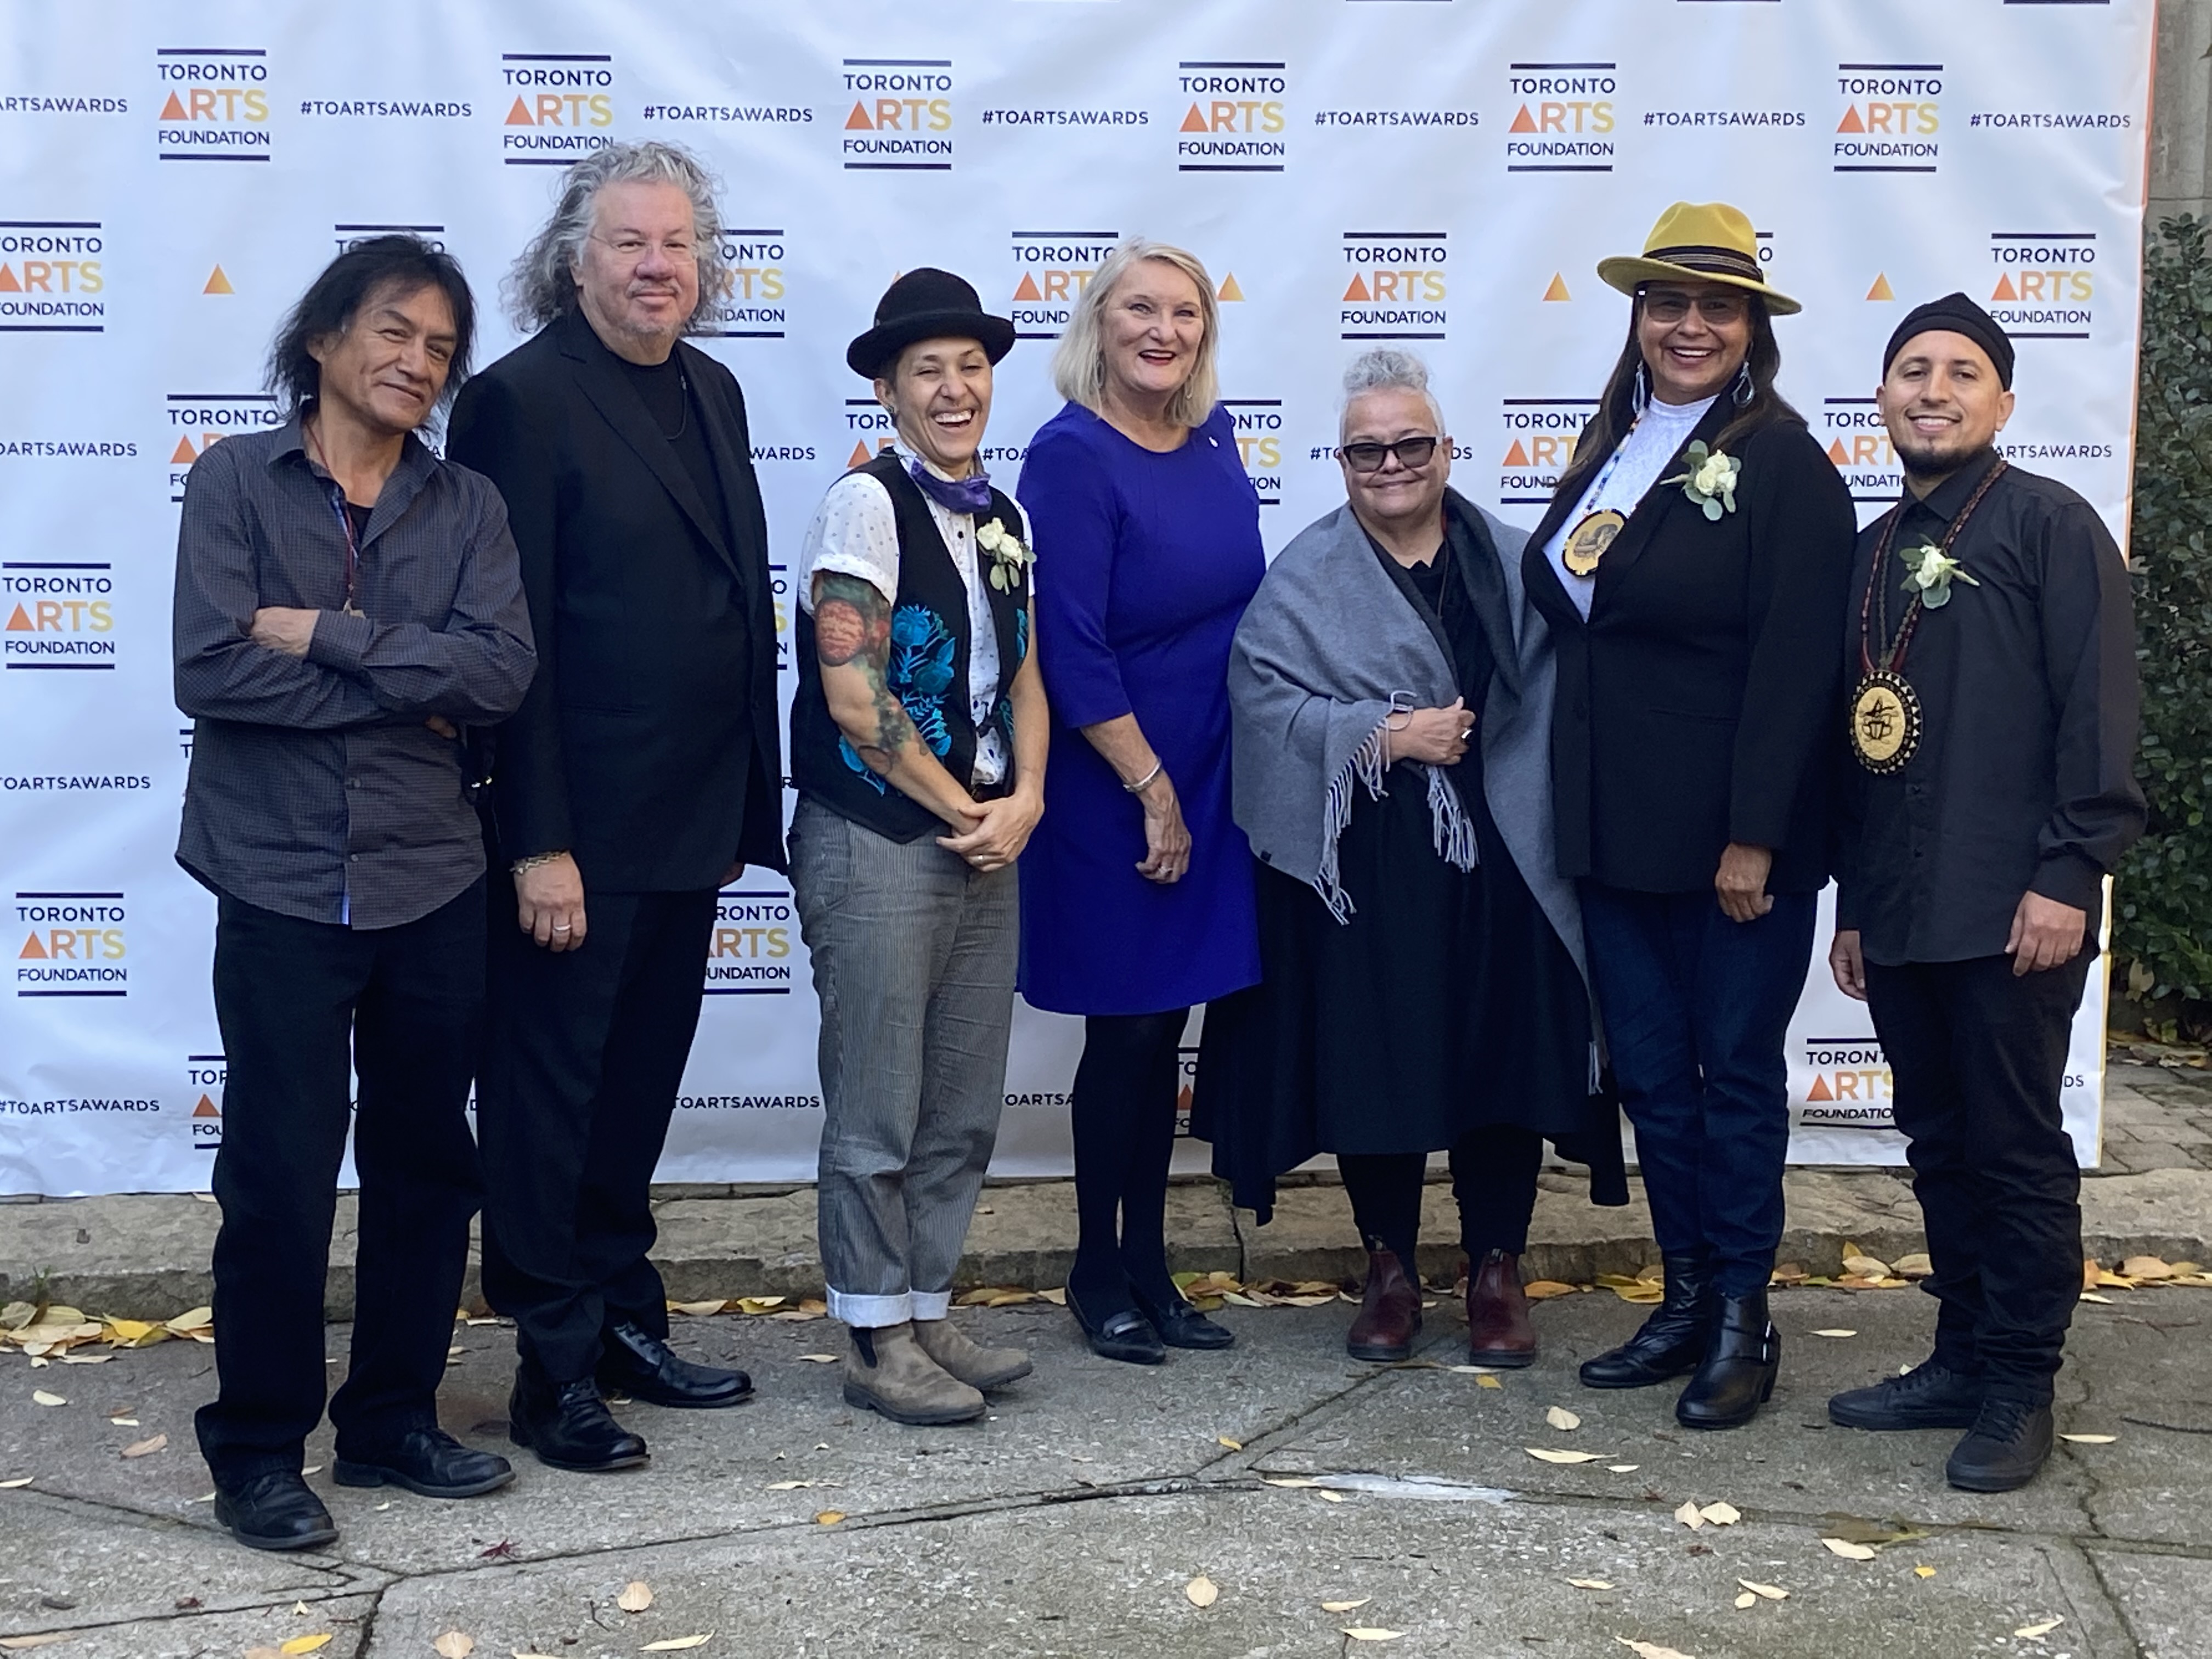 A picture of all the award finalists with Claire Hopkinson and Catherine Tammaro. They are standing in front of a Toronto Arts Foundation banner.